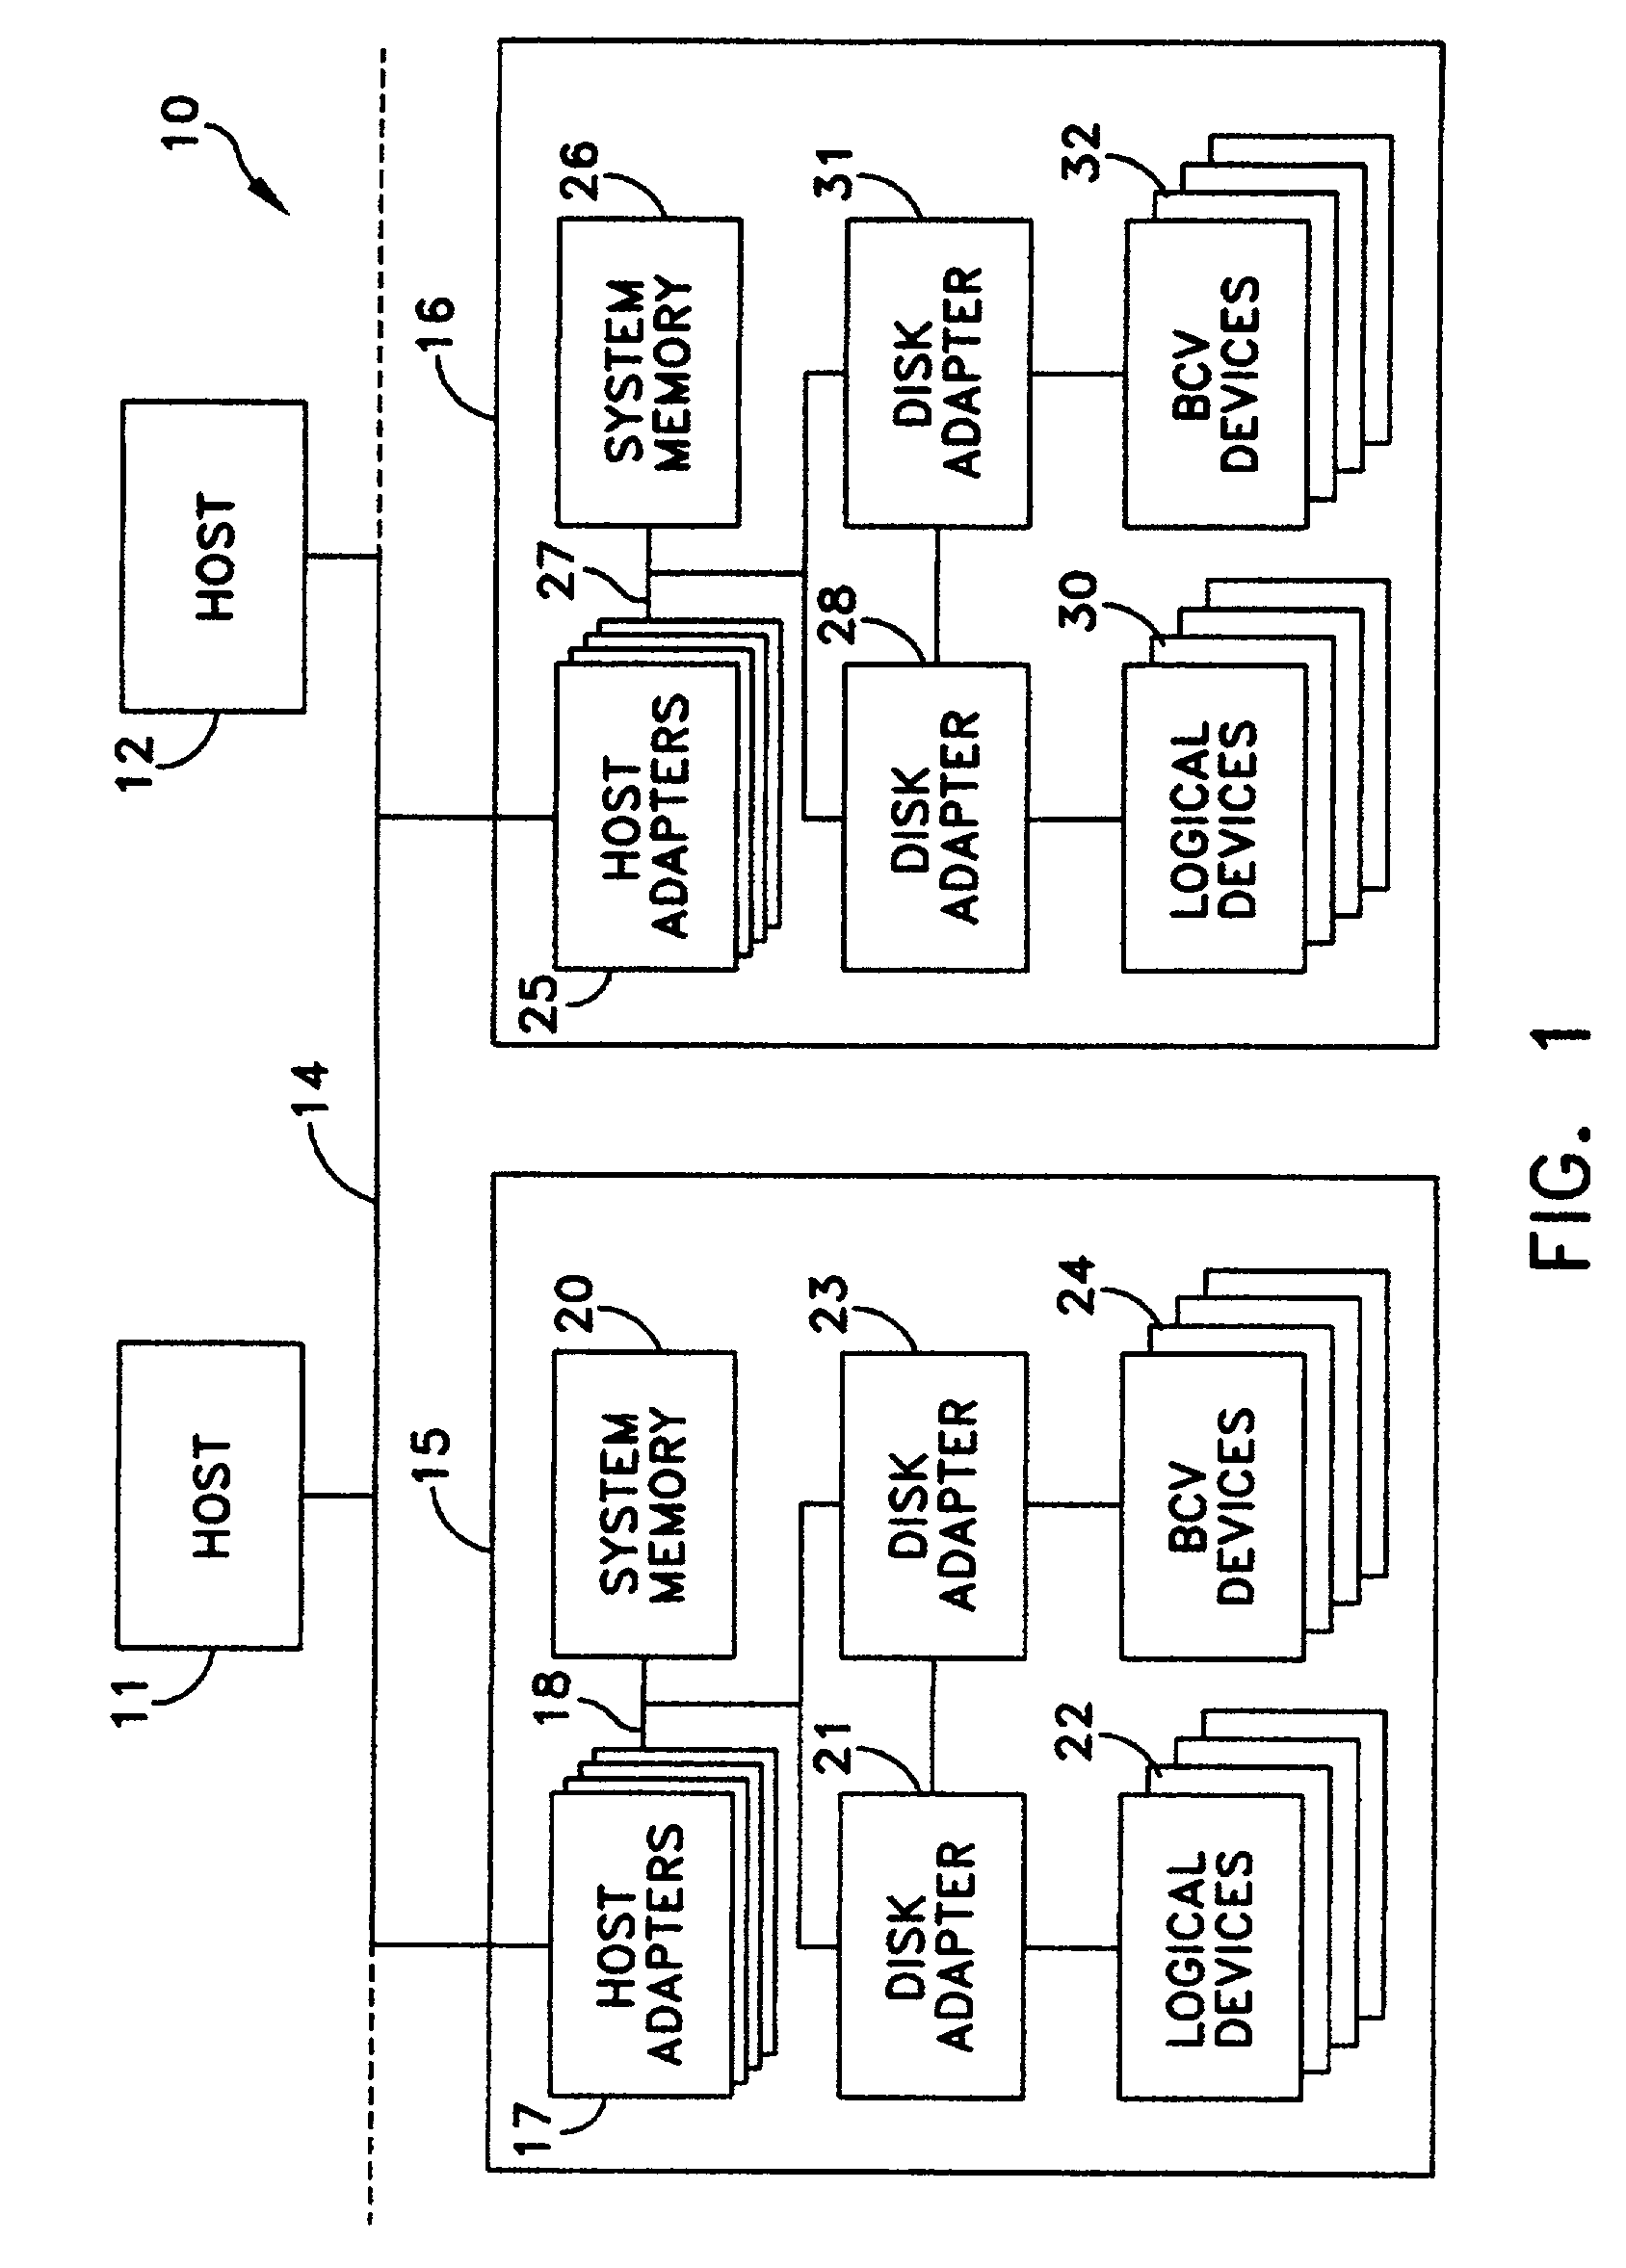 Method and apparatus for enhancing operations in disk array storage devices